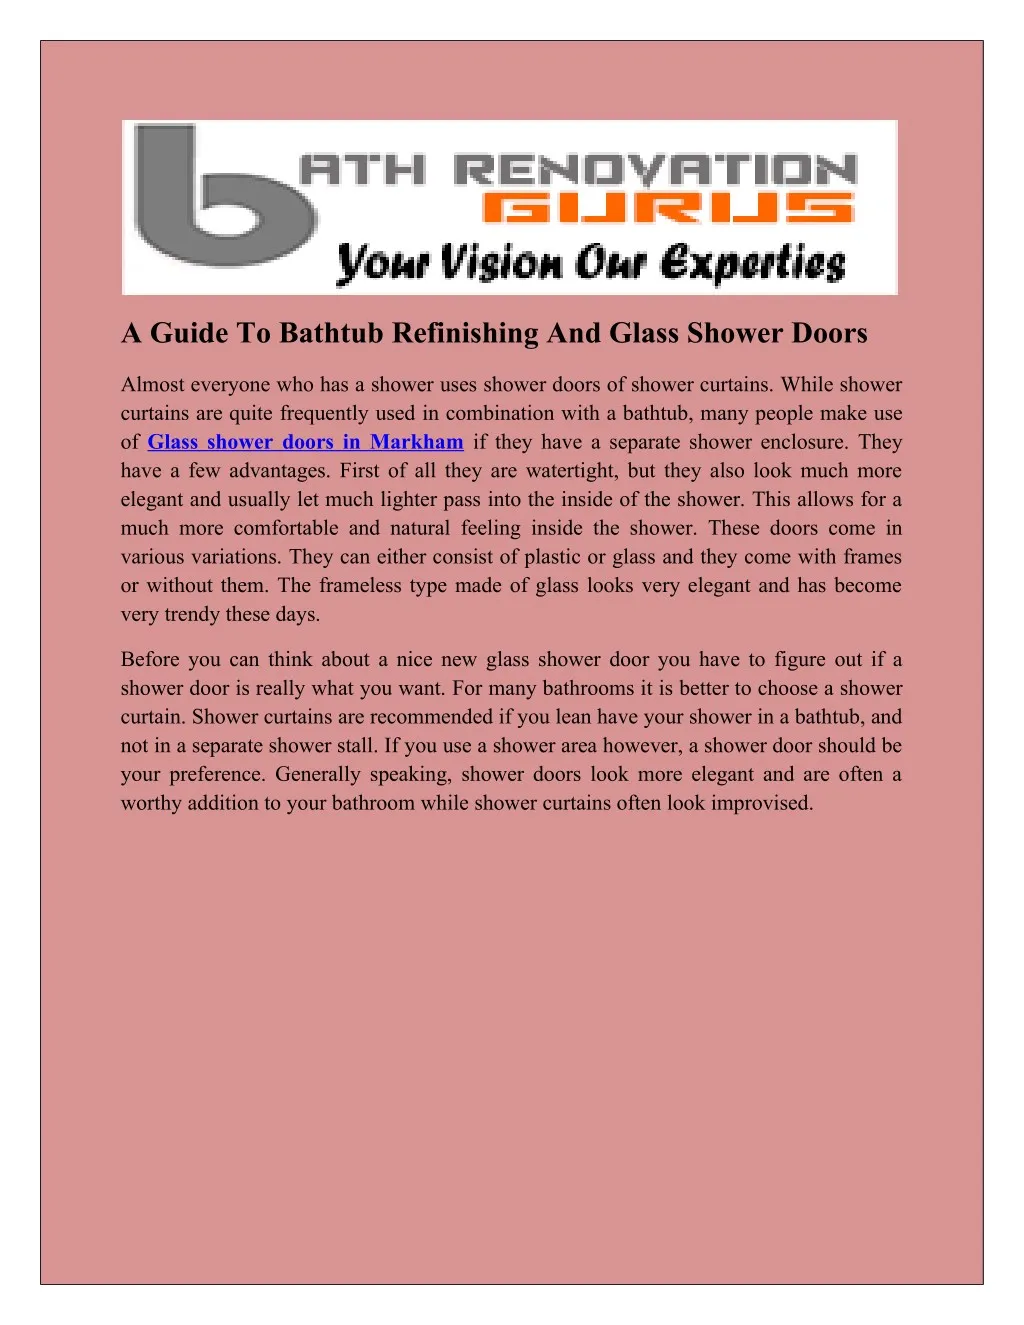 a guide to bathtub refinishing and glass shower